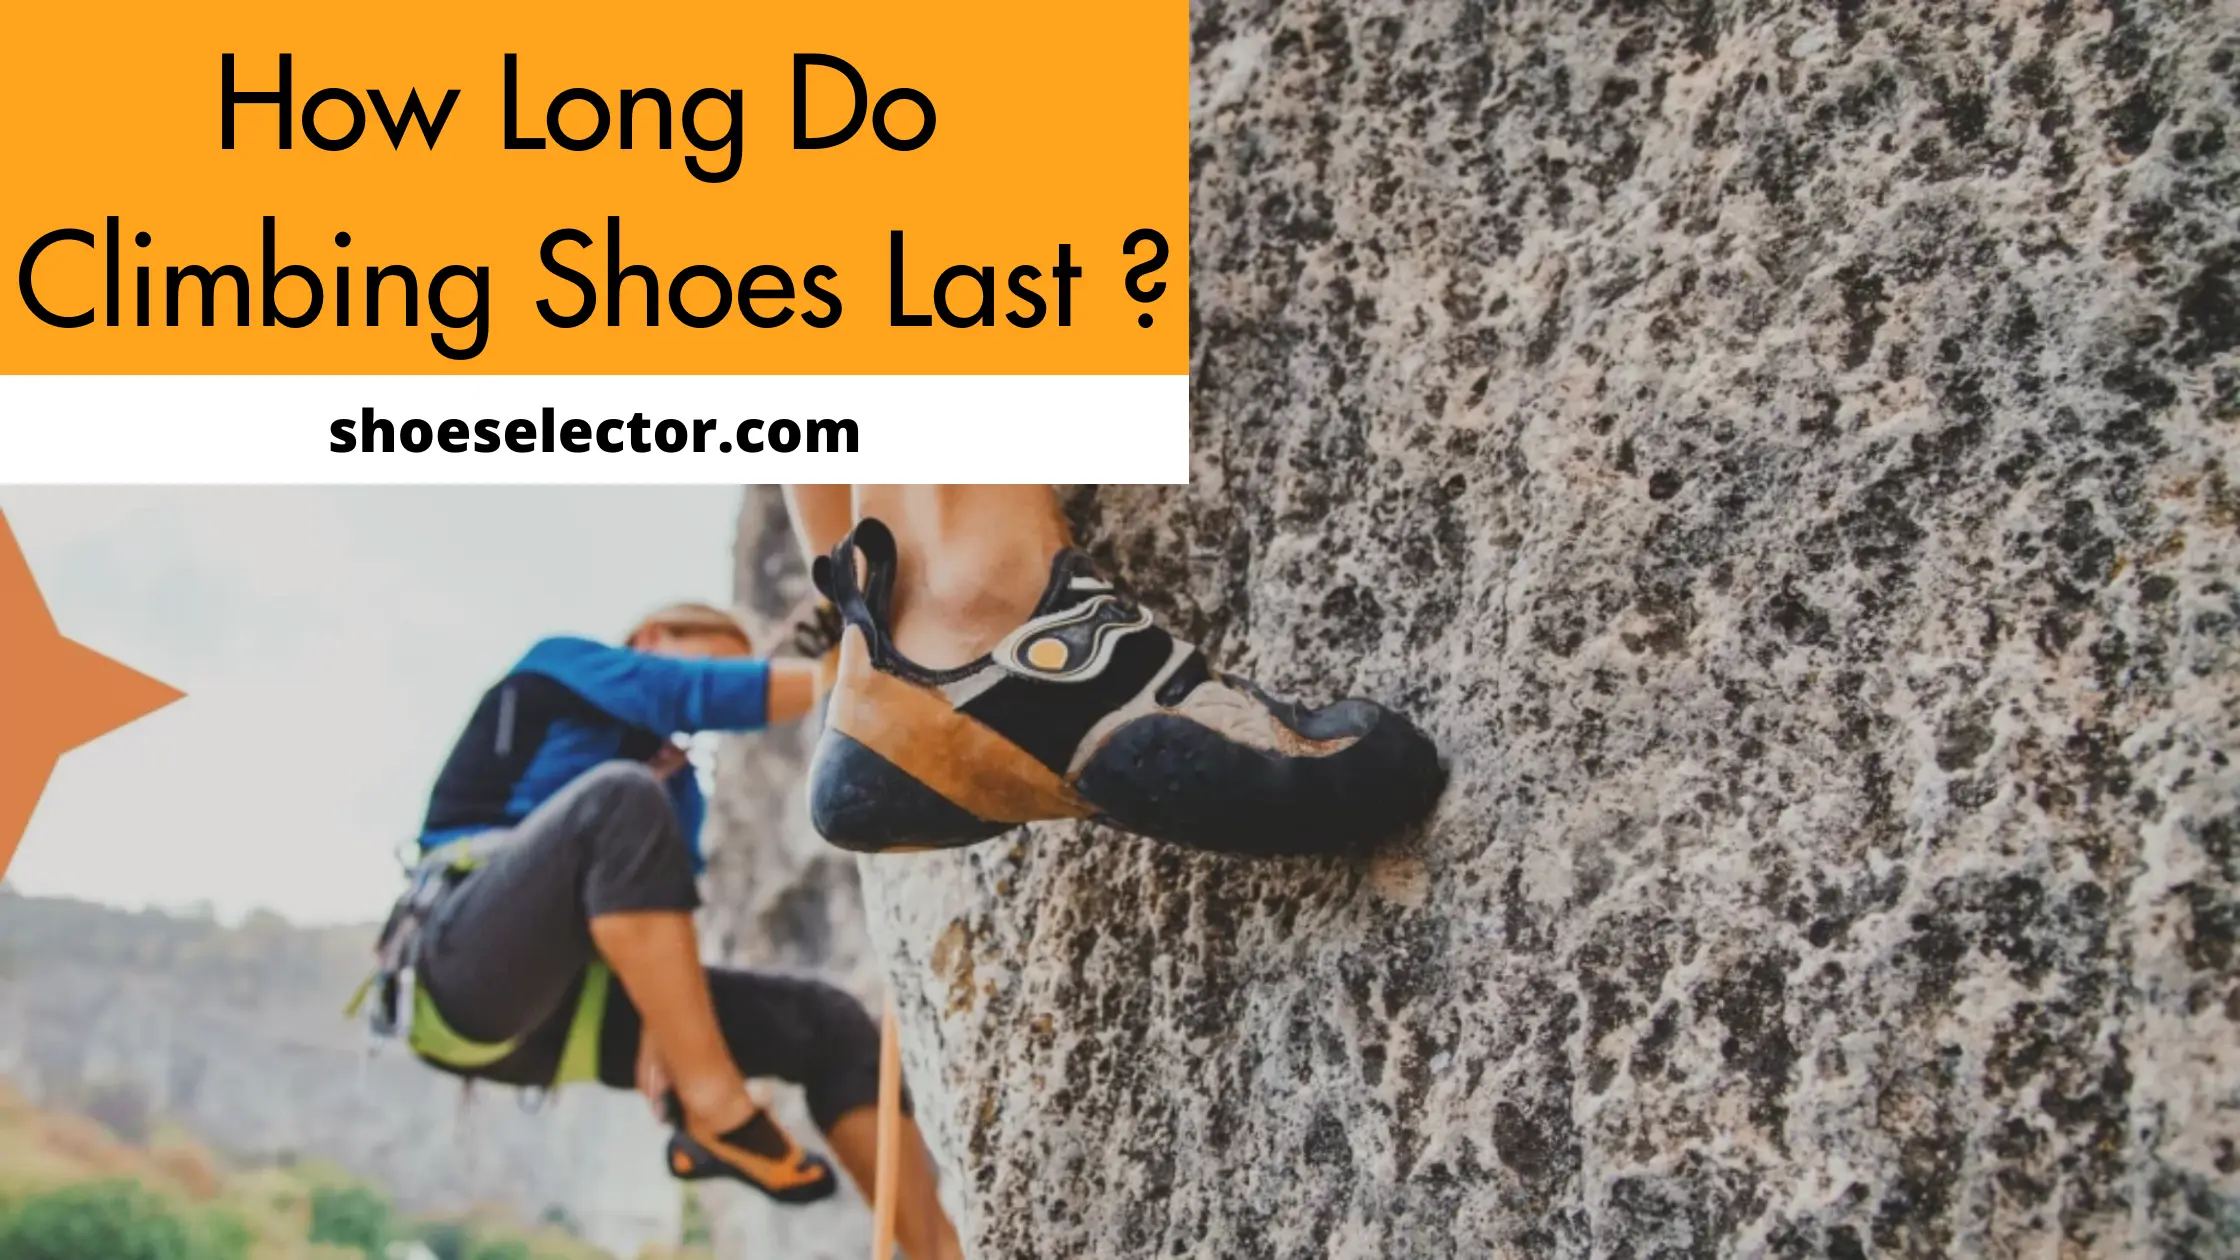 How Long Do Climbing Shoes Last? - Complete Guide